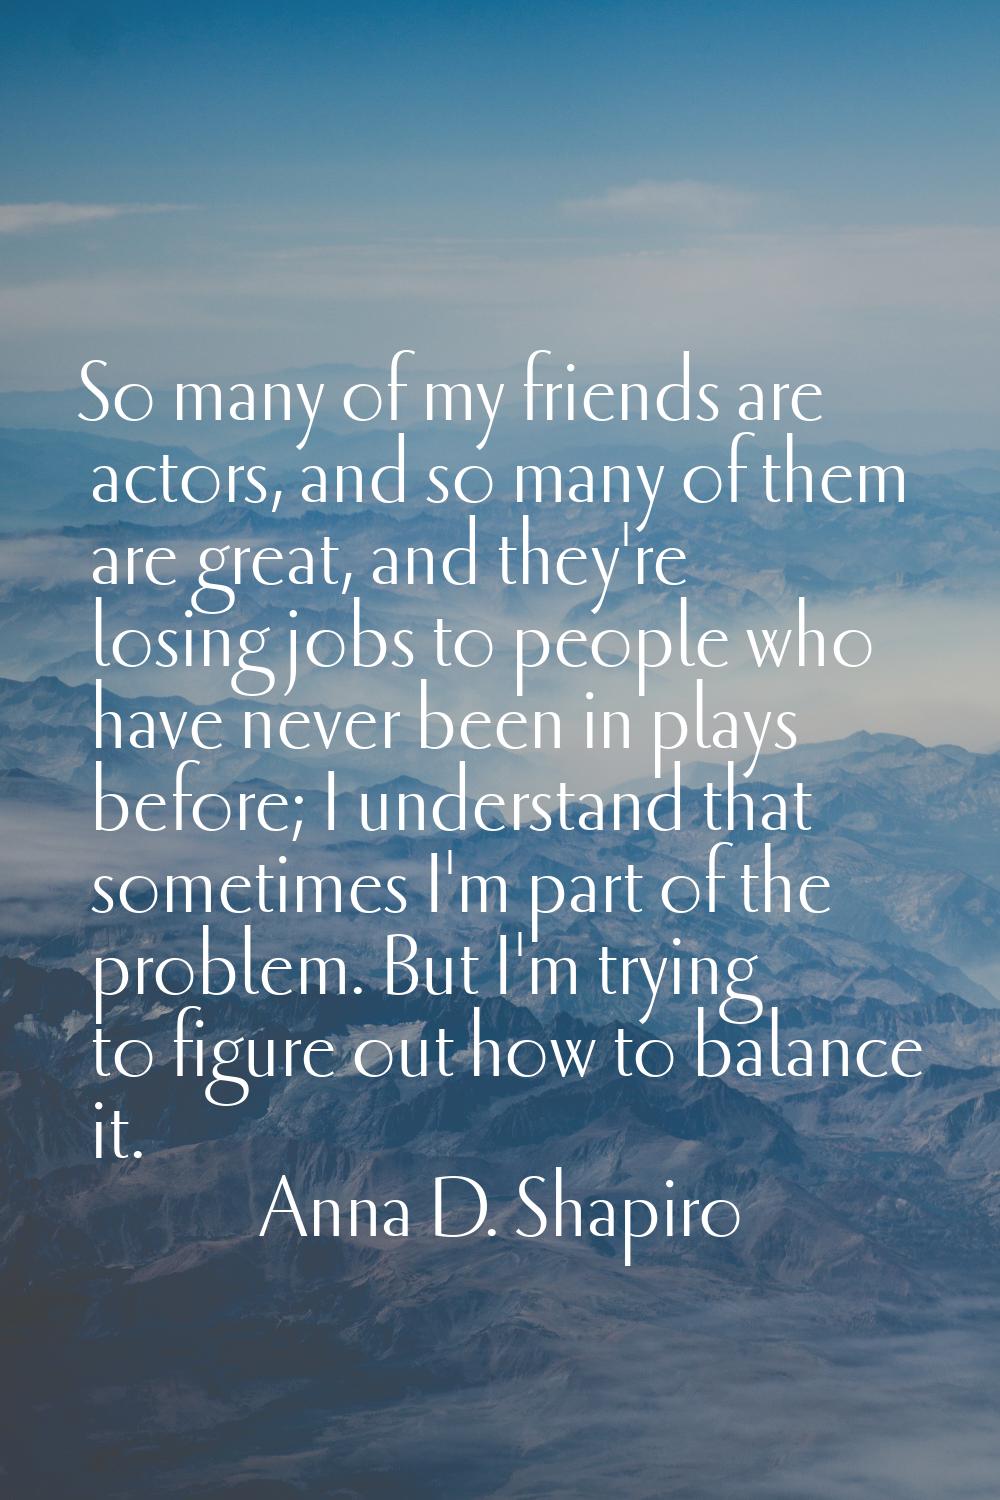 So many of my friends are actors, and so many of them are great, and they're losing jobs to people 